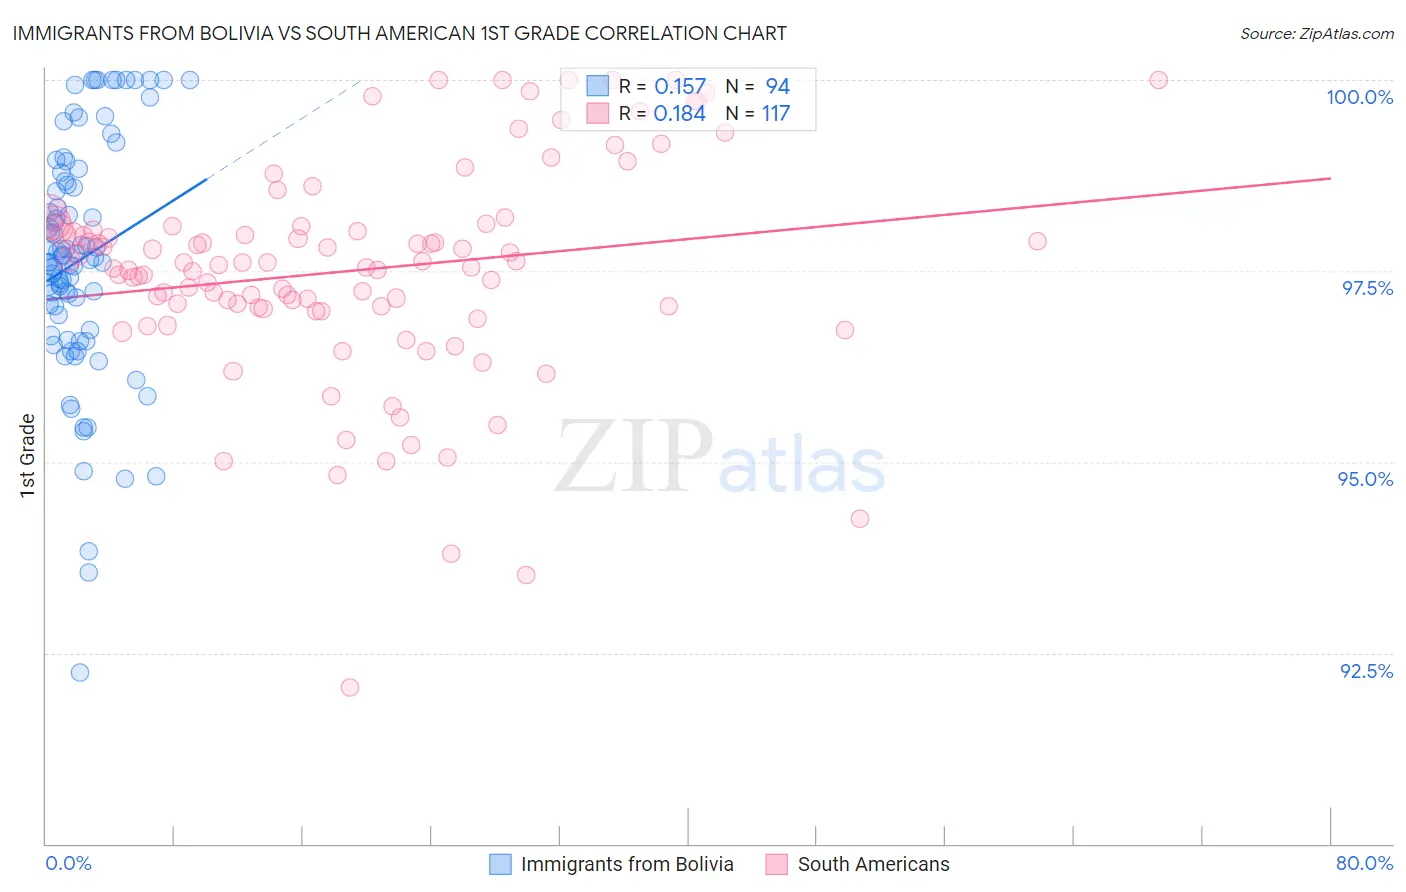 Immigrants from Bolivia vs South American 1st Grade